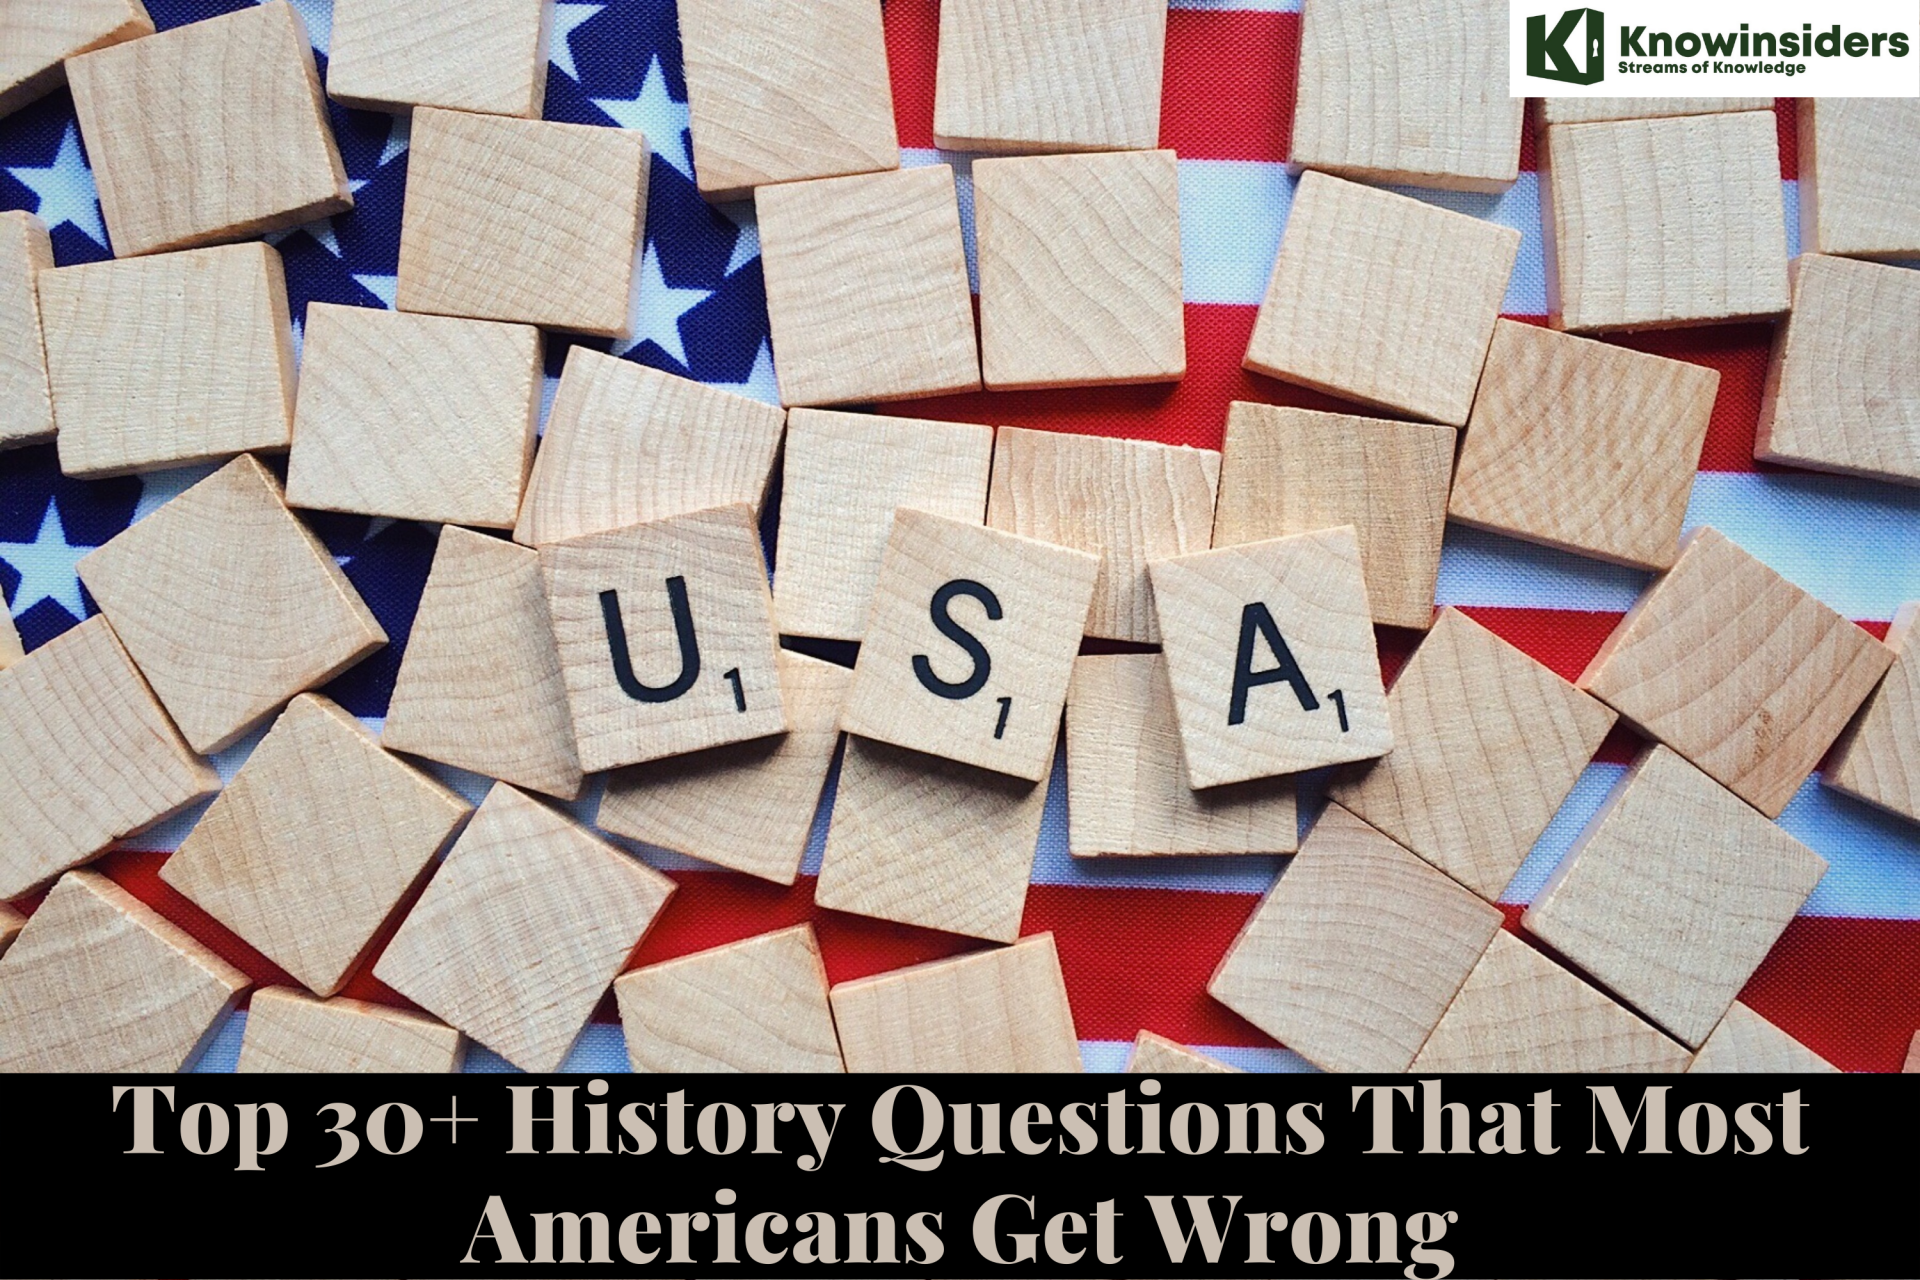 Top 30+ History Questions That Most Americans Get Wrong